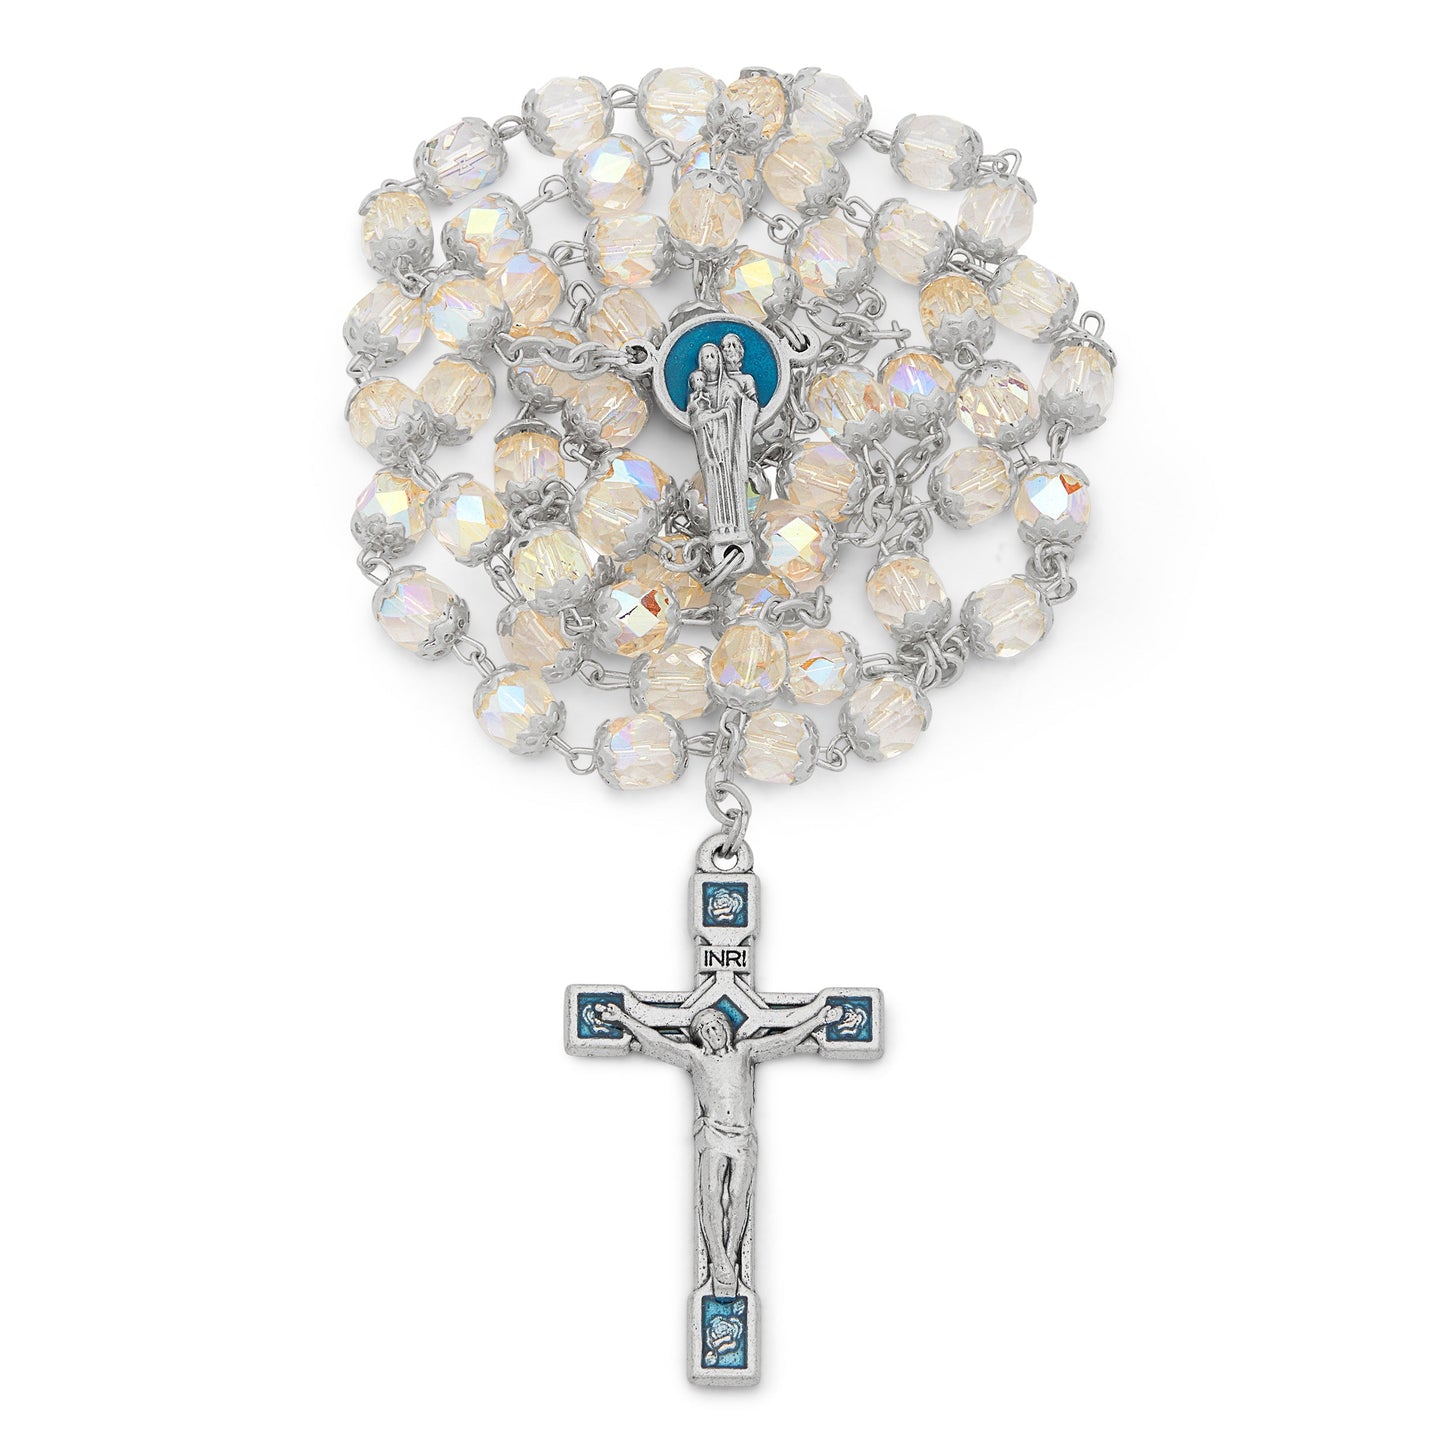 MONDO CATTOLICO Prayer Beads Holy Family Rosary Beads in Transparent Faceted Crystal